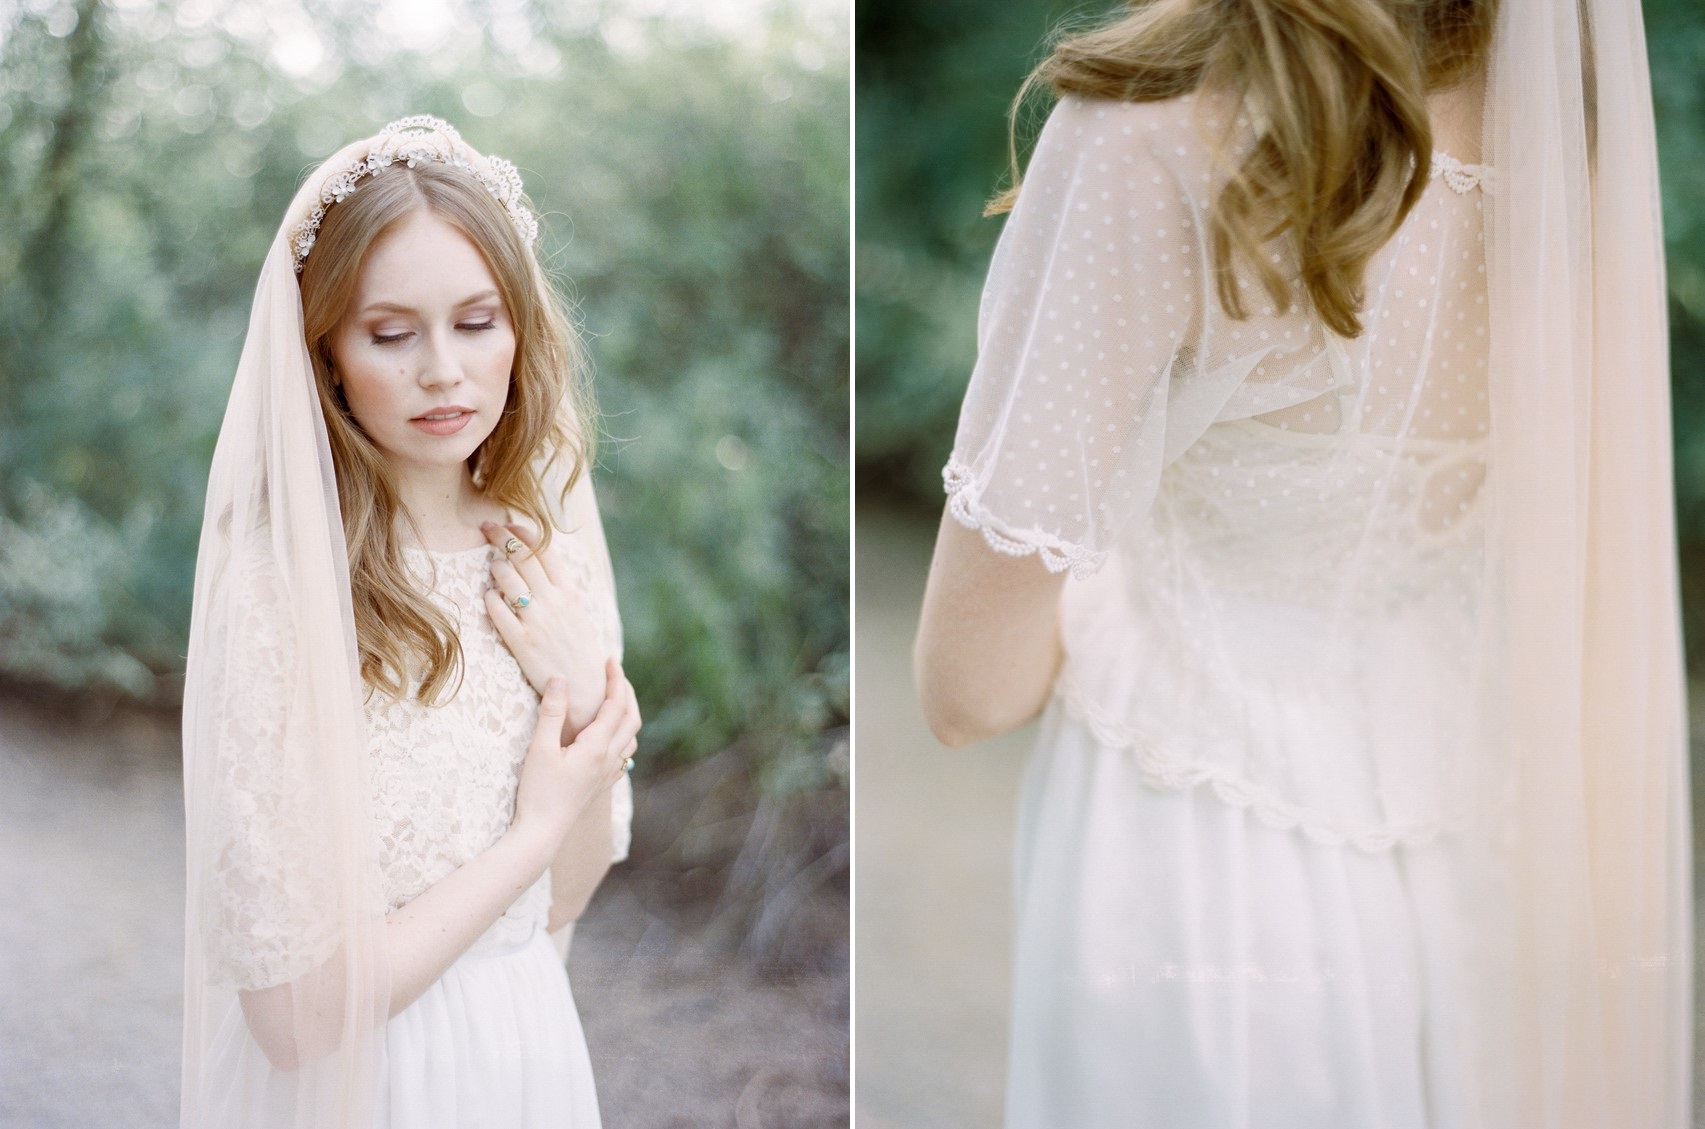 Breathtaking Bridal Headpieces and a Desert Bridal Shoot from Mignonne Handmade